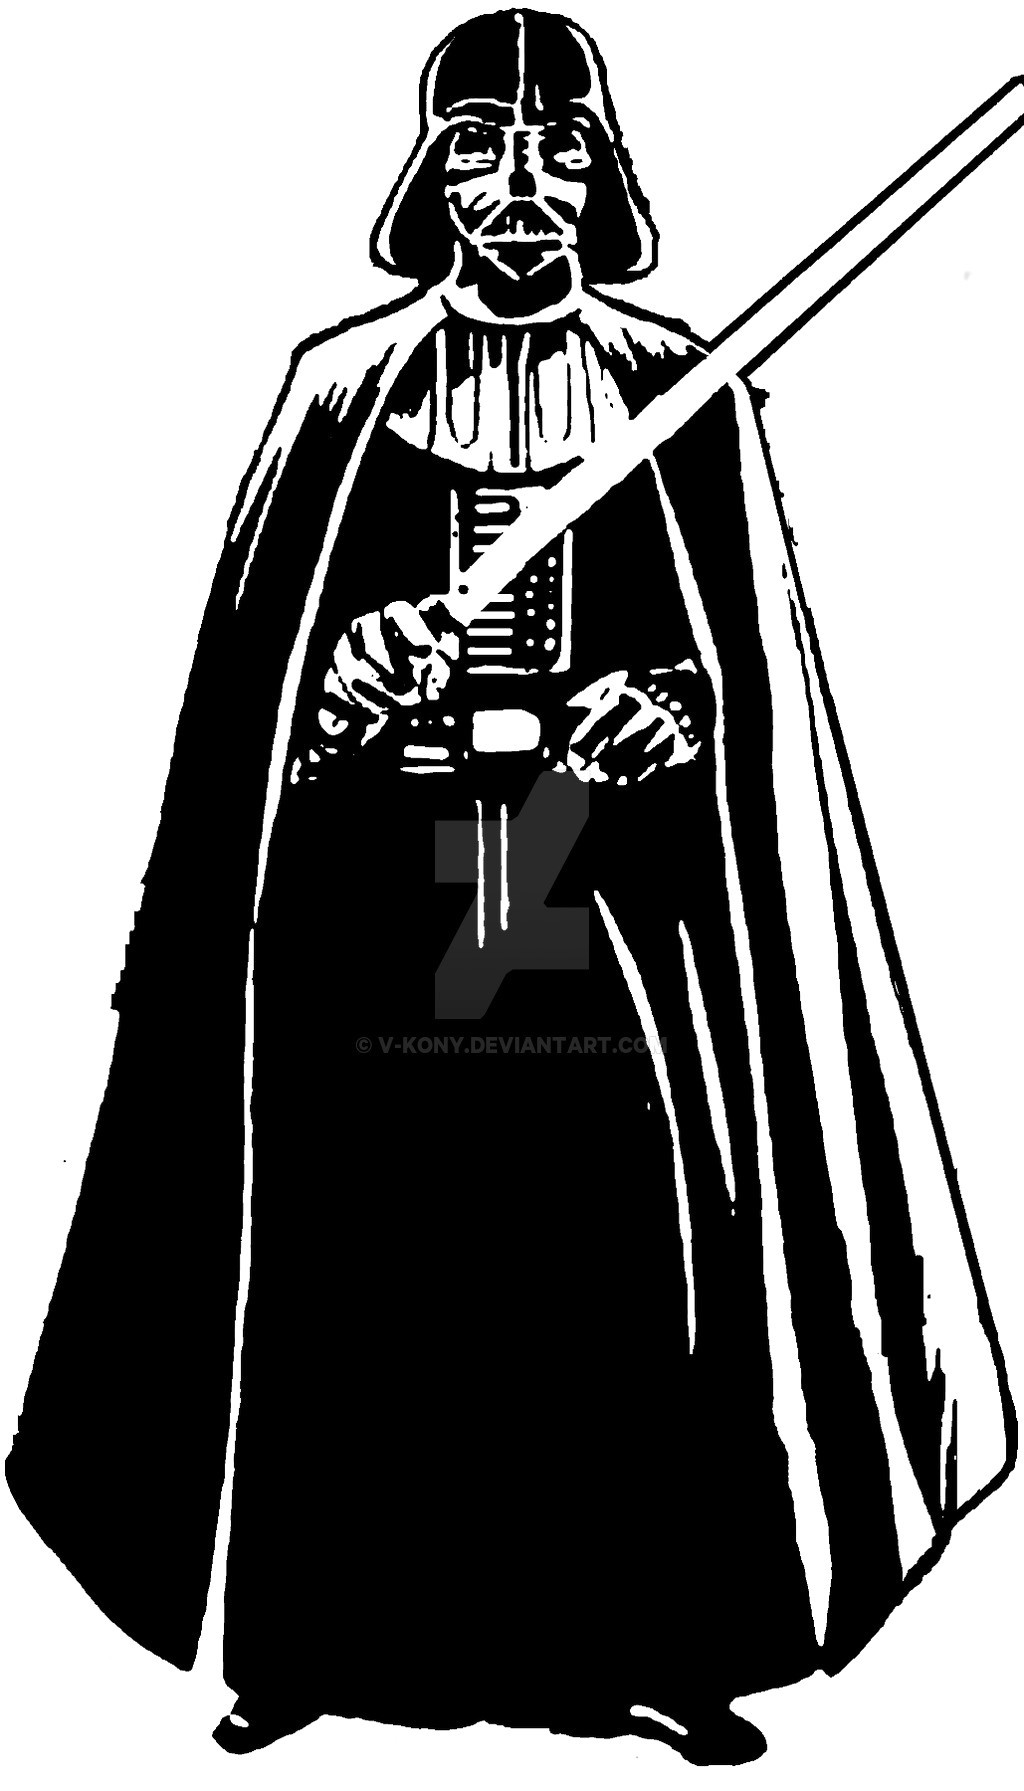 Station . Darth vader clipart black and white